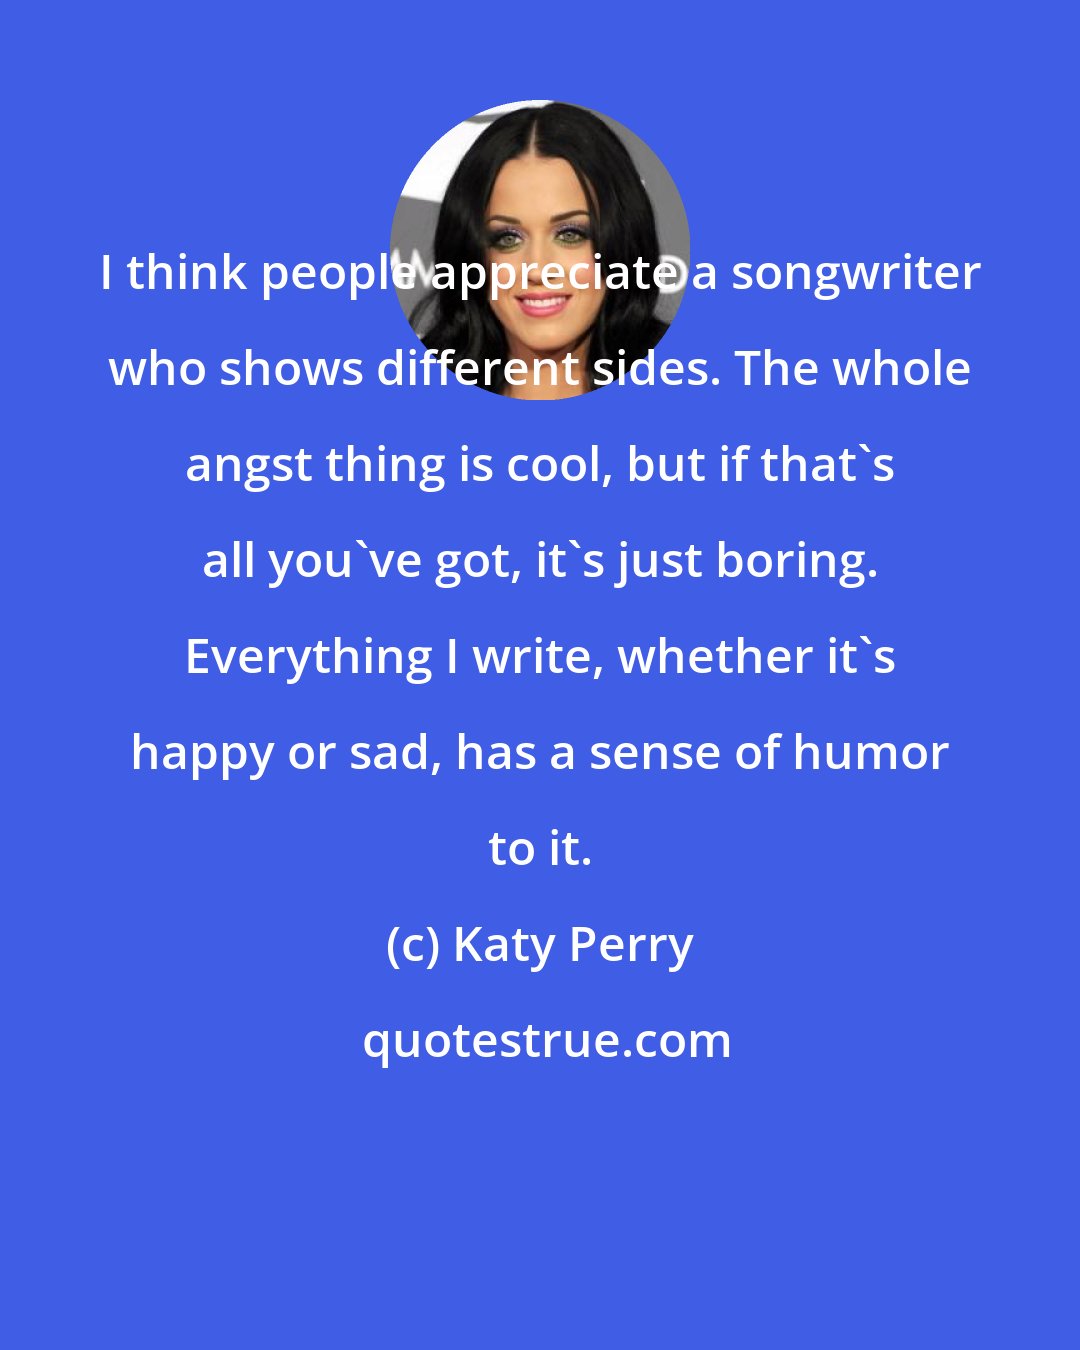 Katy Perry: I think people appreciate a songwriter who shows different sides. The whole angst thing is cool, but if that's all you've got, it's just boring. Everything I write, whether it's happy or sad, has a sense of humor to it.